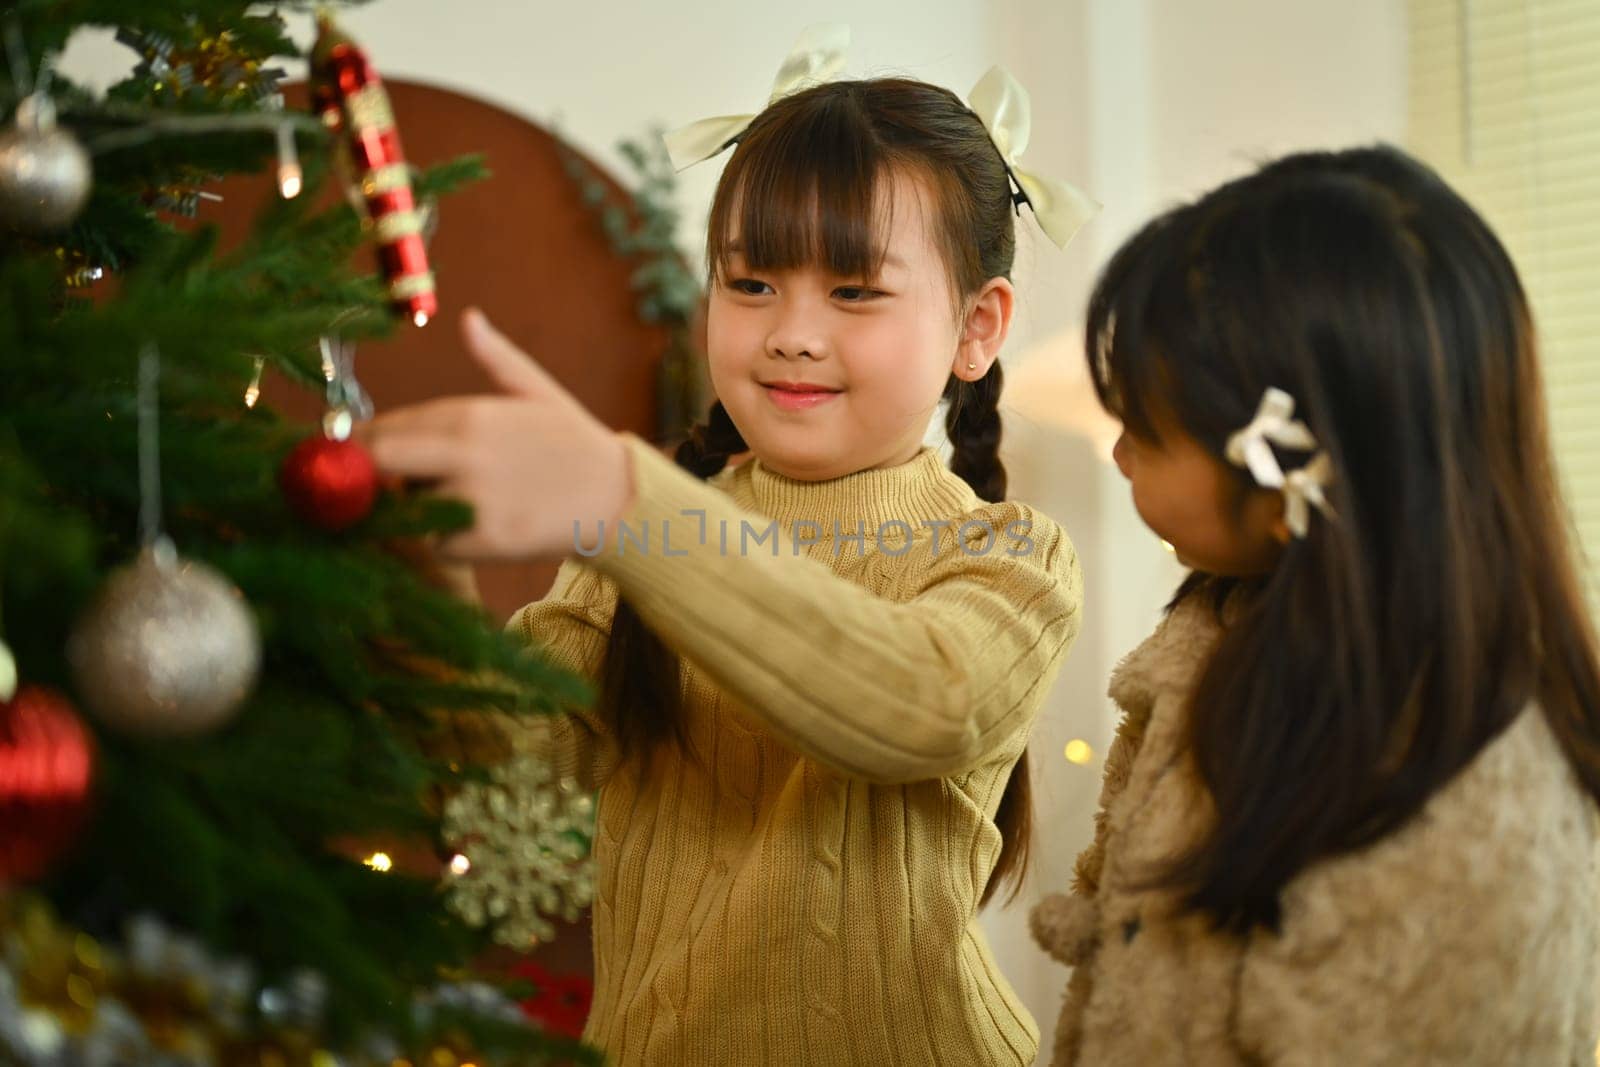 Two happy girls decorating Christmas tree and enjoying preparing winter holidays at home.